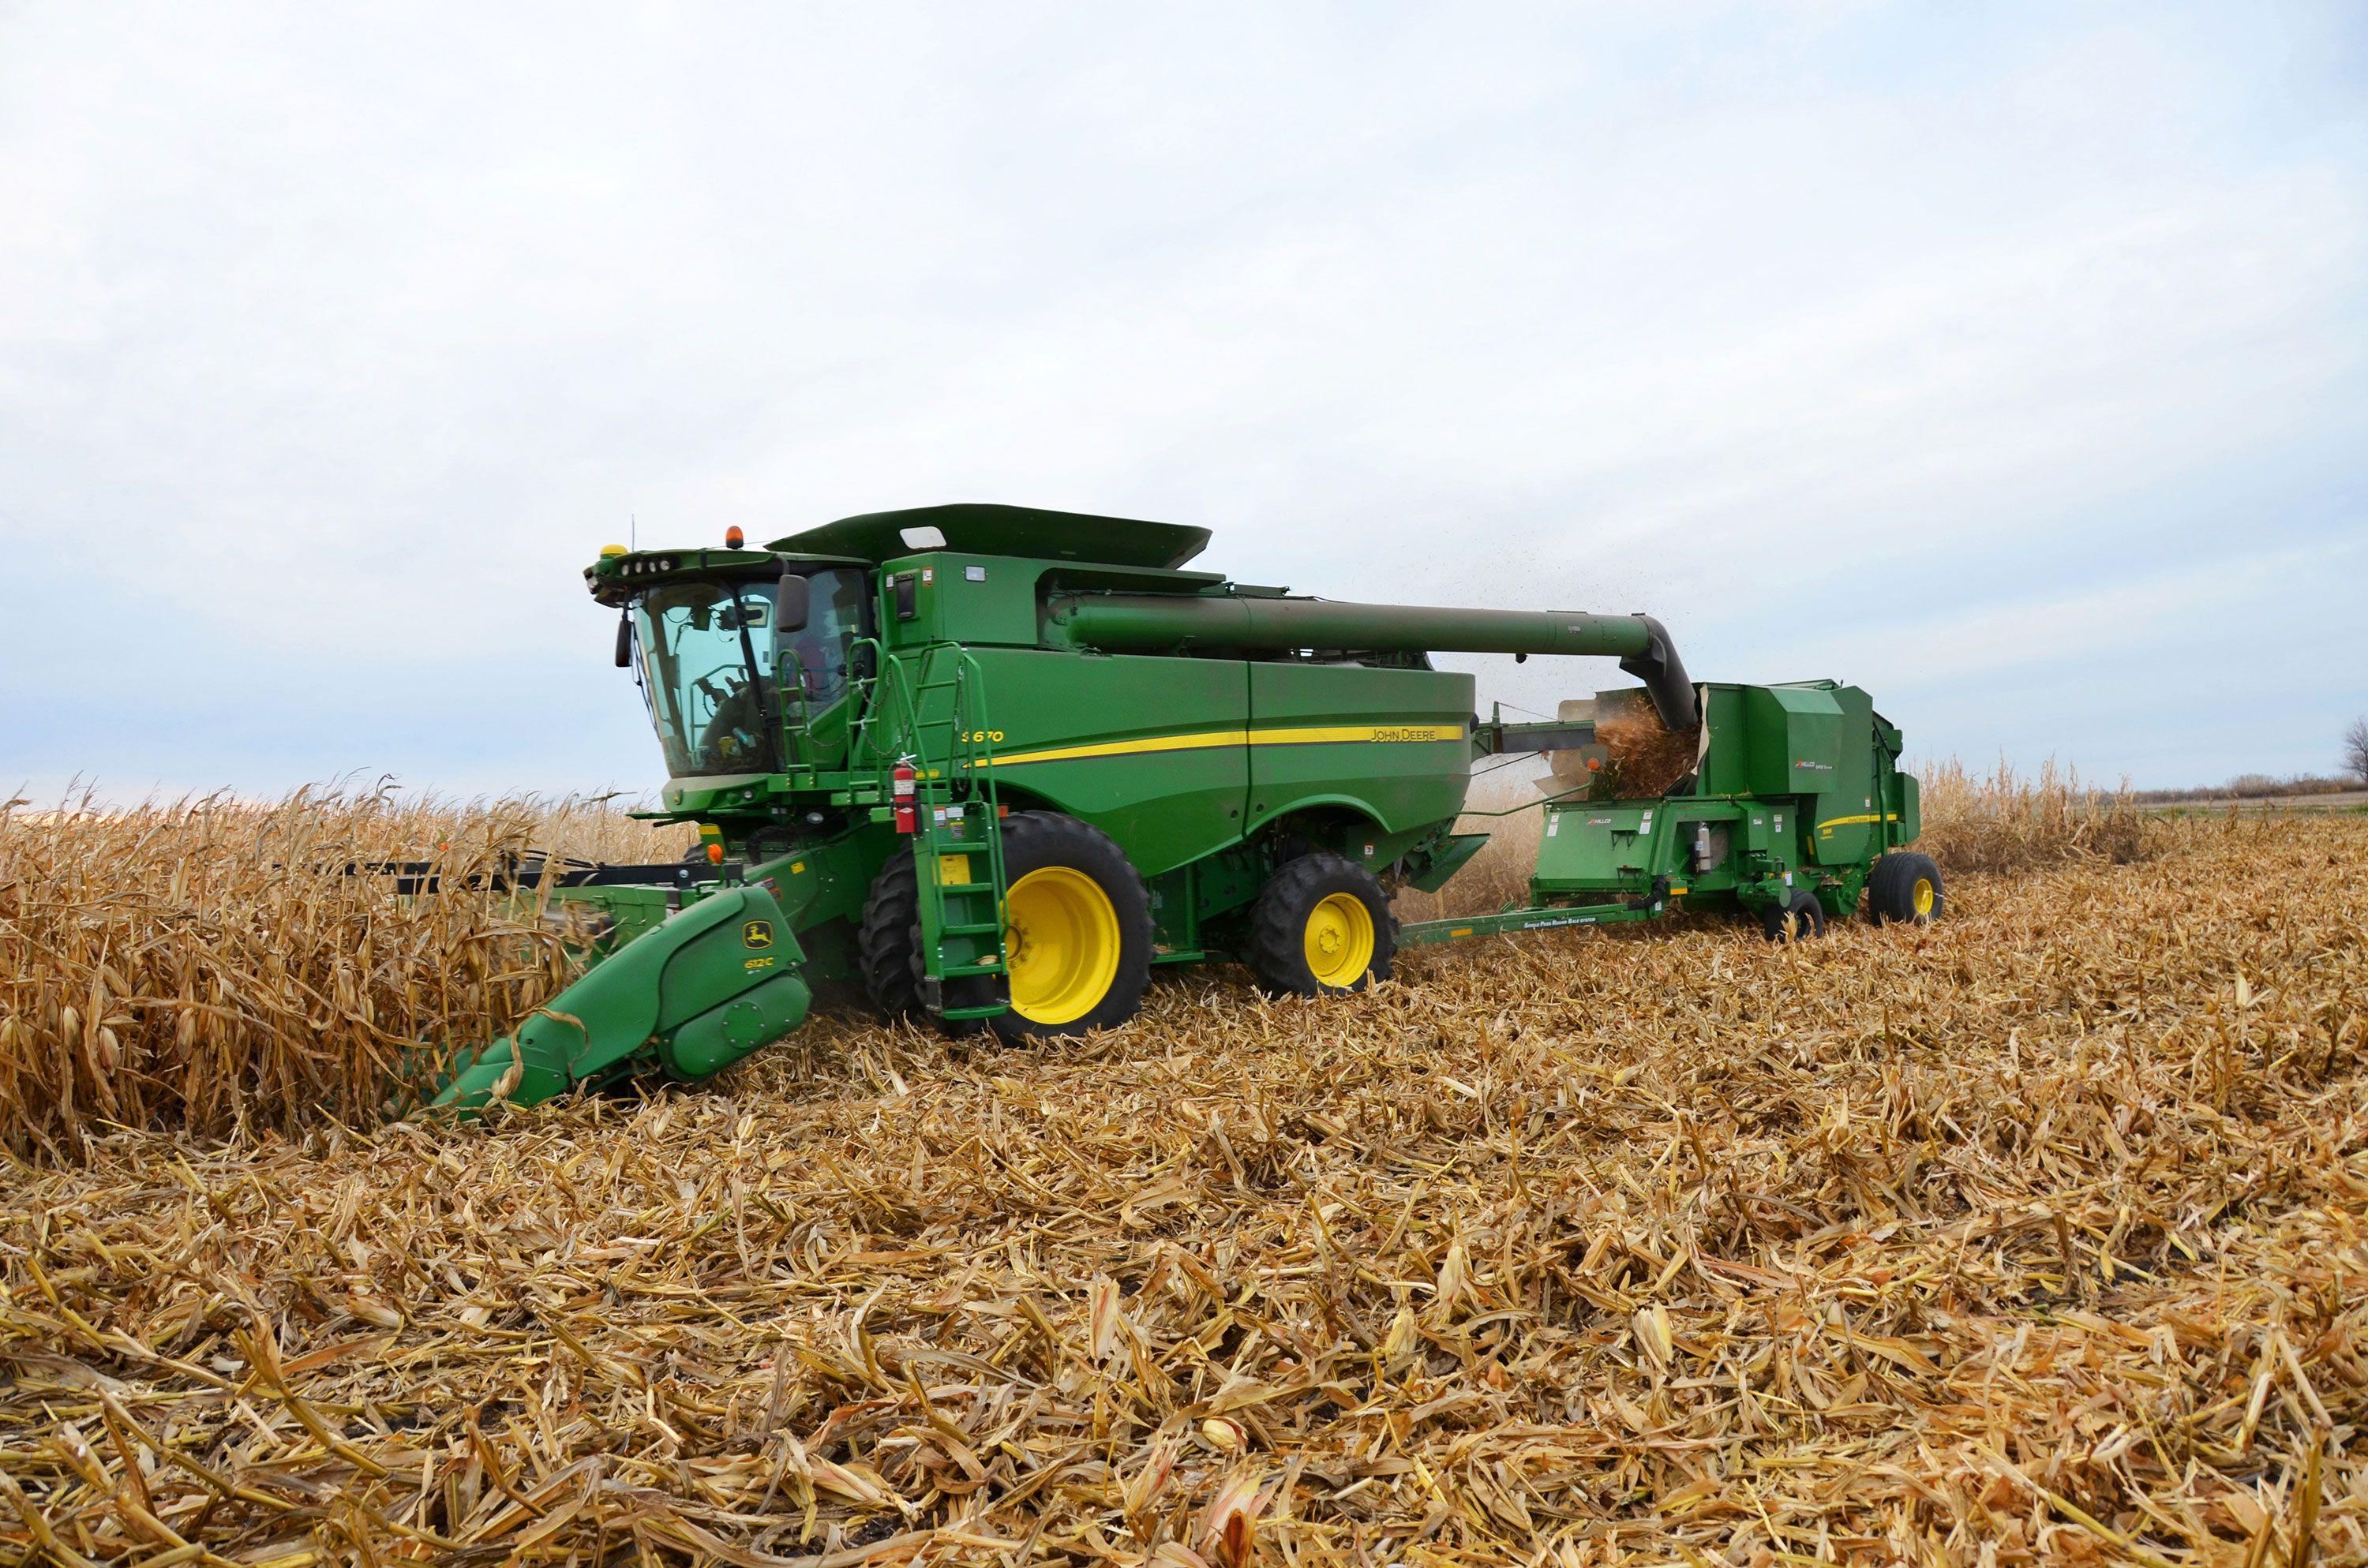 Image Gallery: Sizing up the 2015 Lineup of New John Deere Products